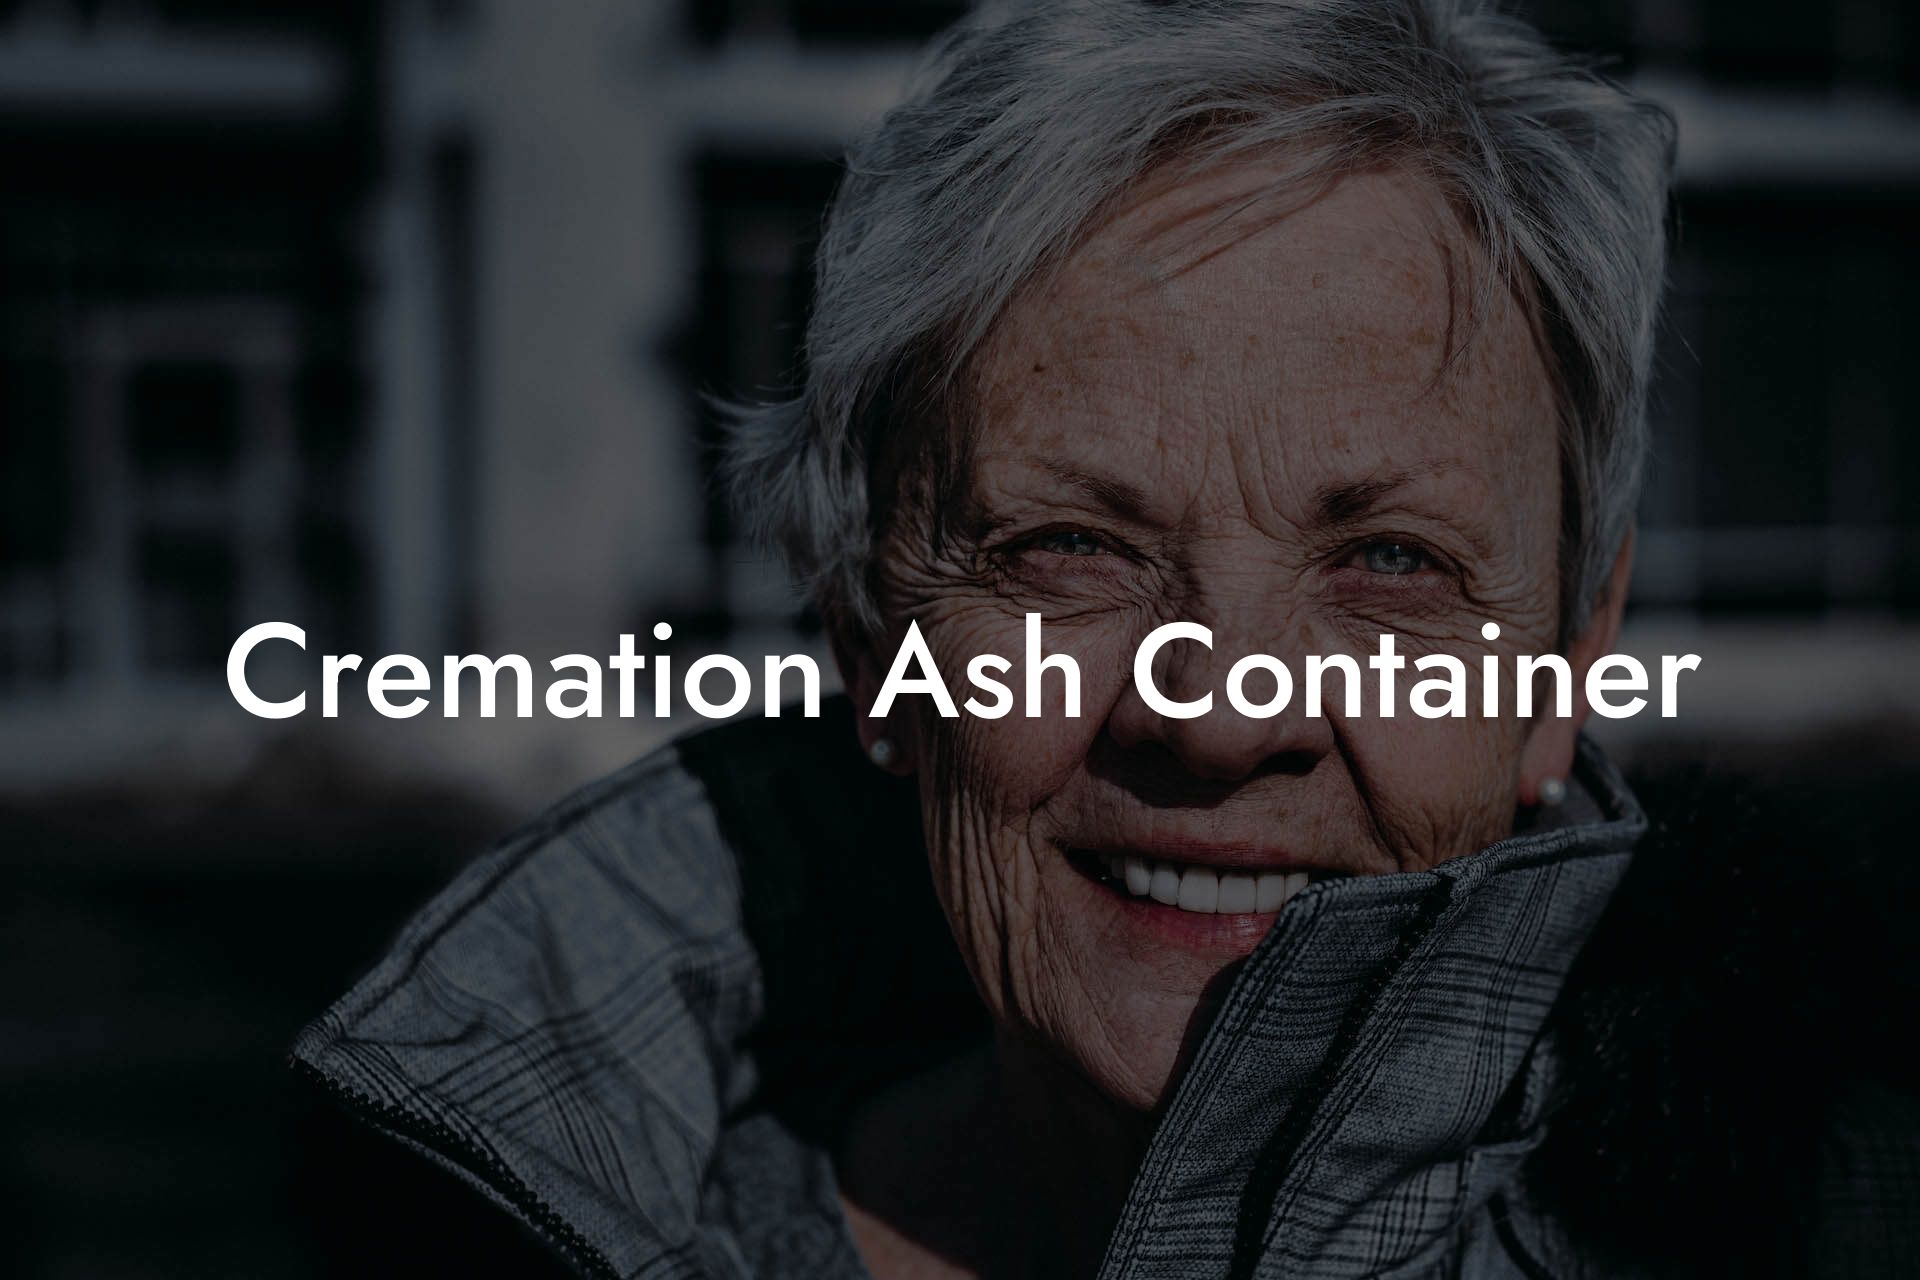 Cremation Ash Container